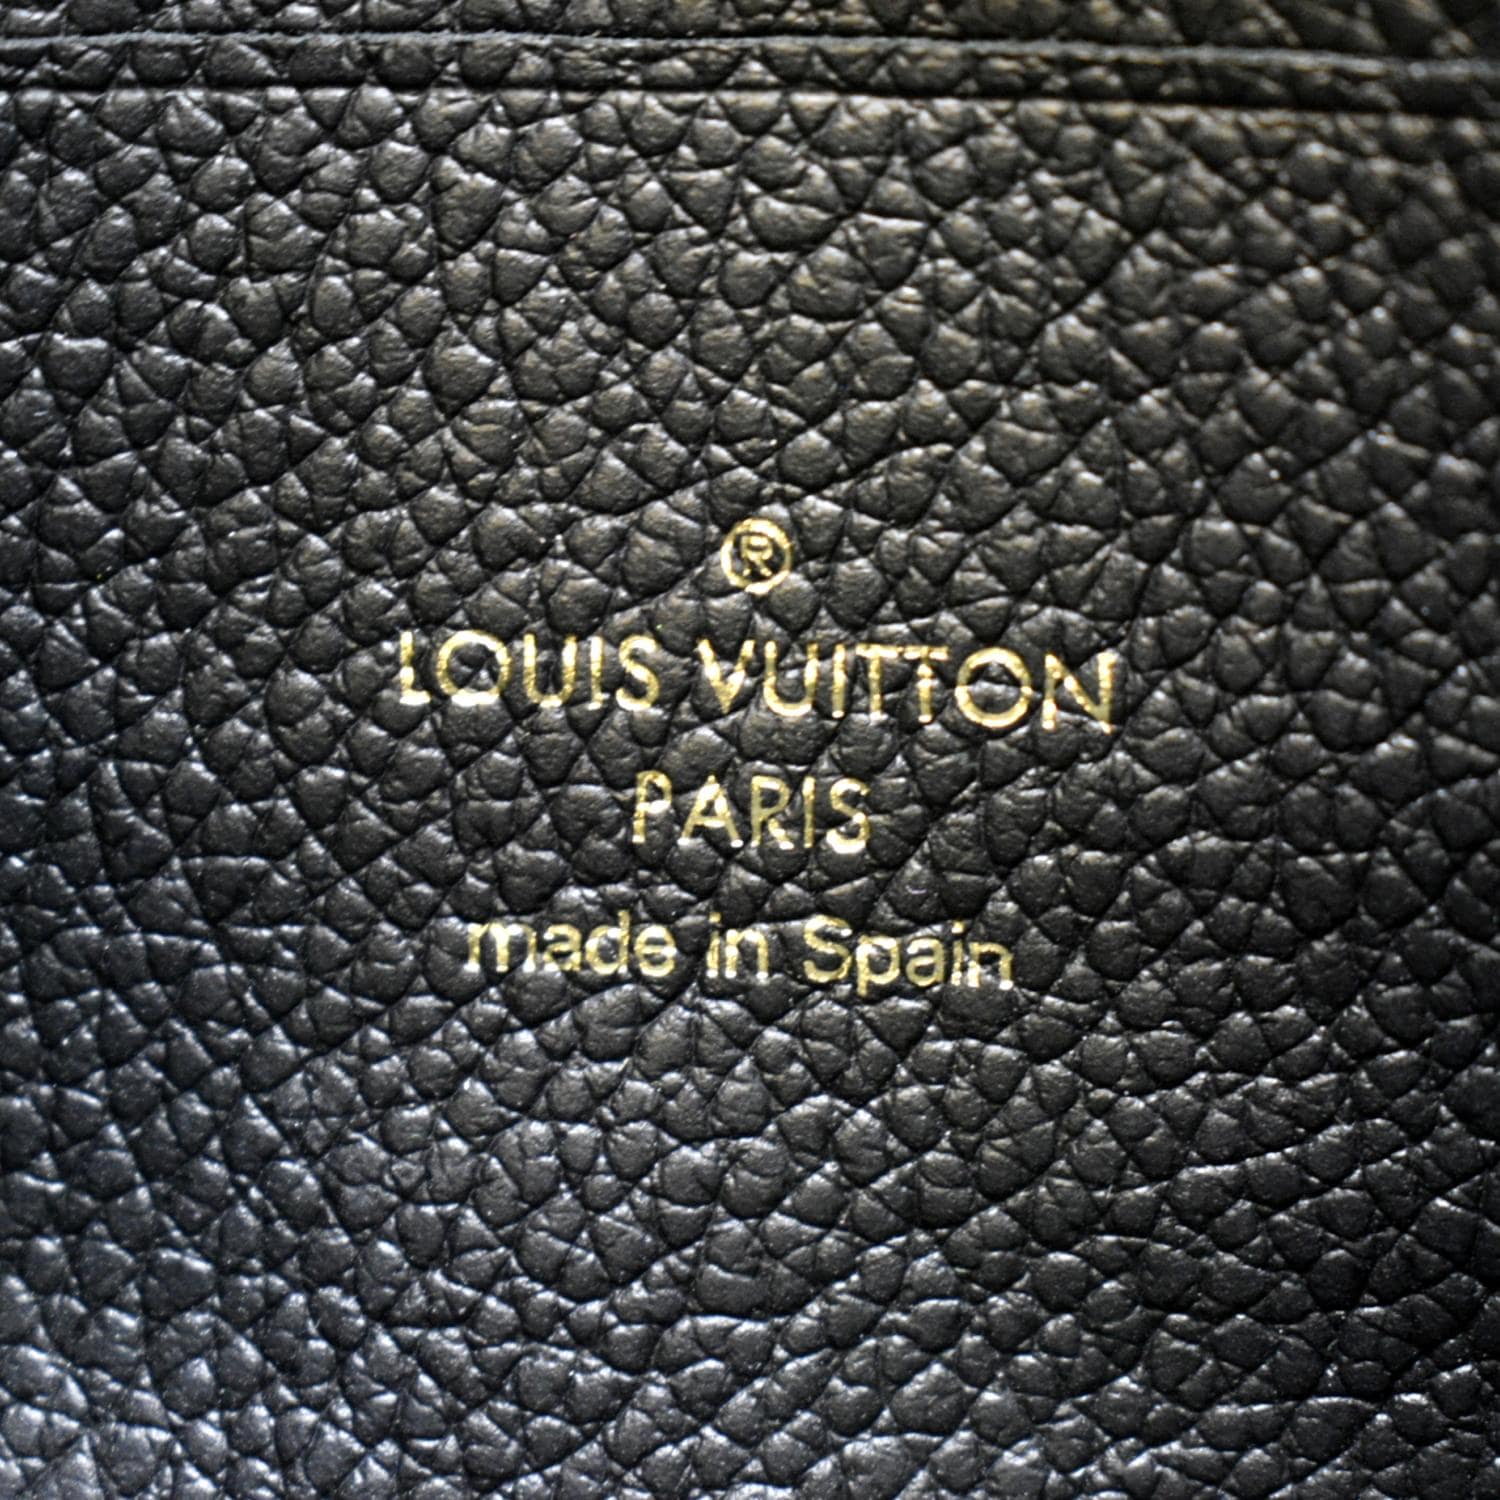 It Would Have Louis Vuitton, Paris, Made In Spain On - Louis